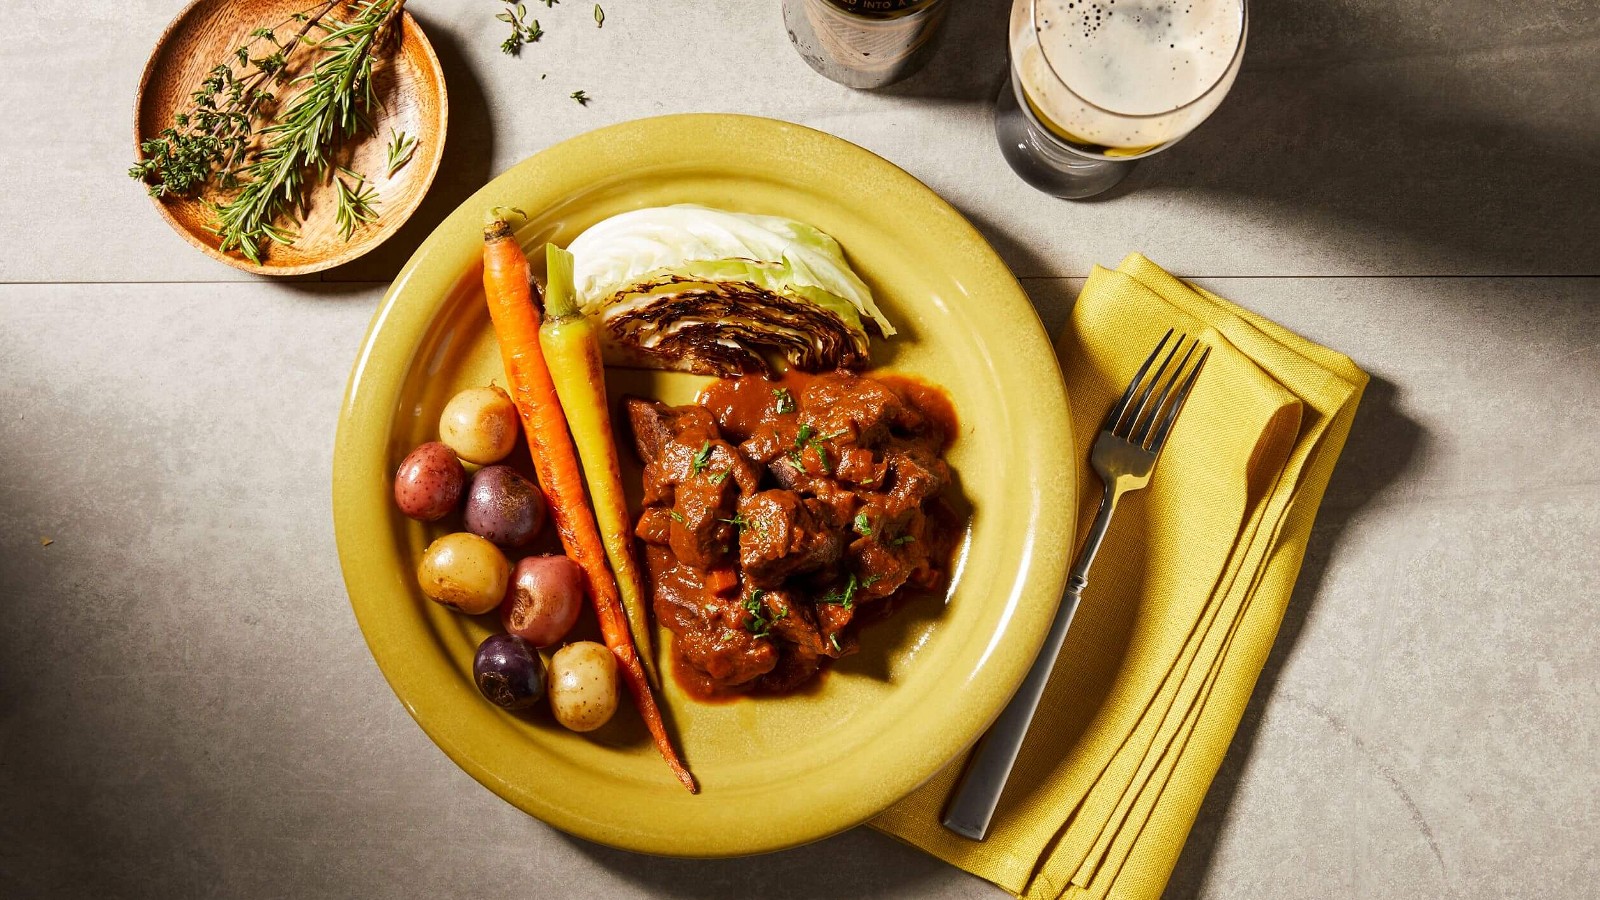 Image of Irish Stew (Lamb or Beef and Guinness Beer)